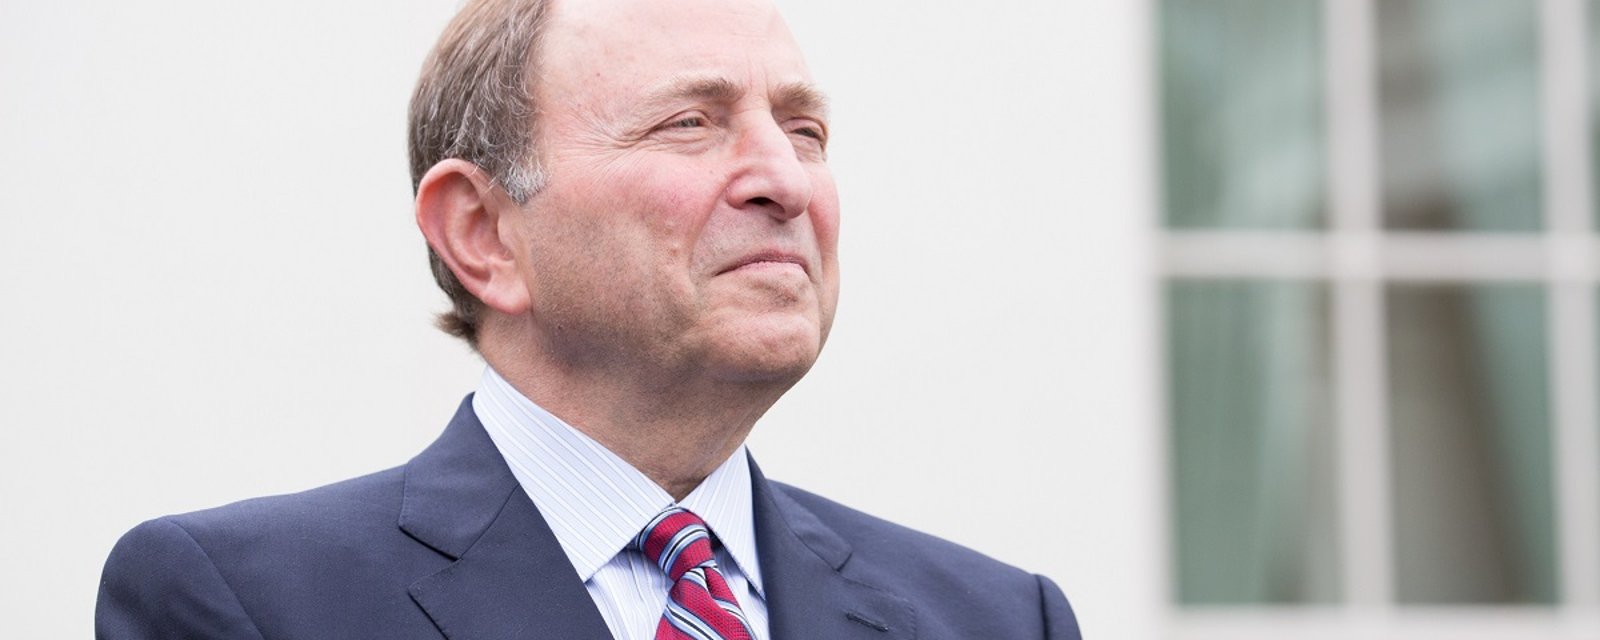 Gary Bettman appears to use relocation as a threat to get a new arena.